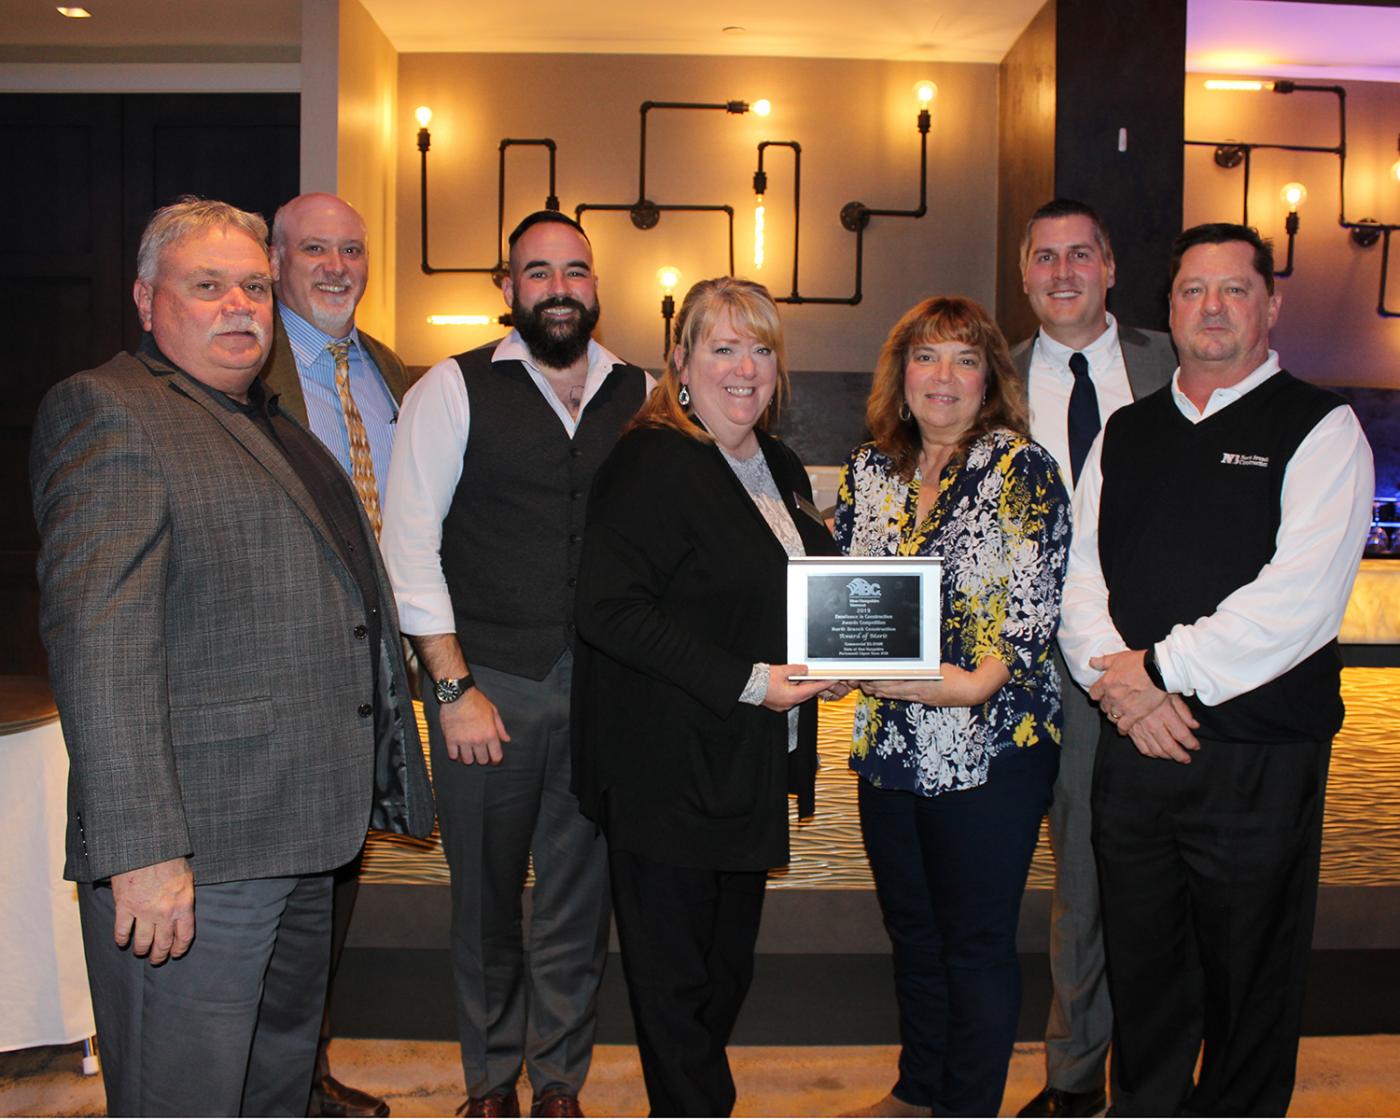 North Branch Receives Award at ABC's 2019 Excellence in Construction Dinner